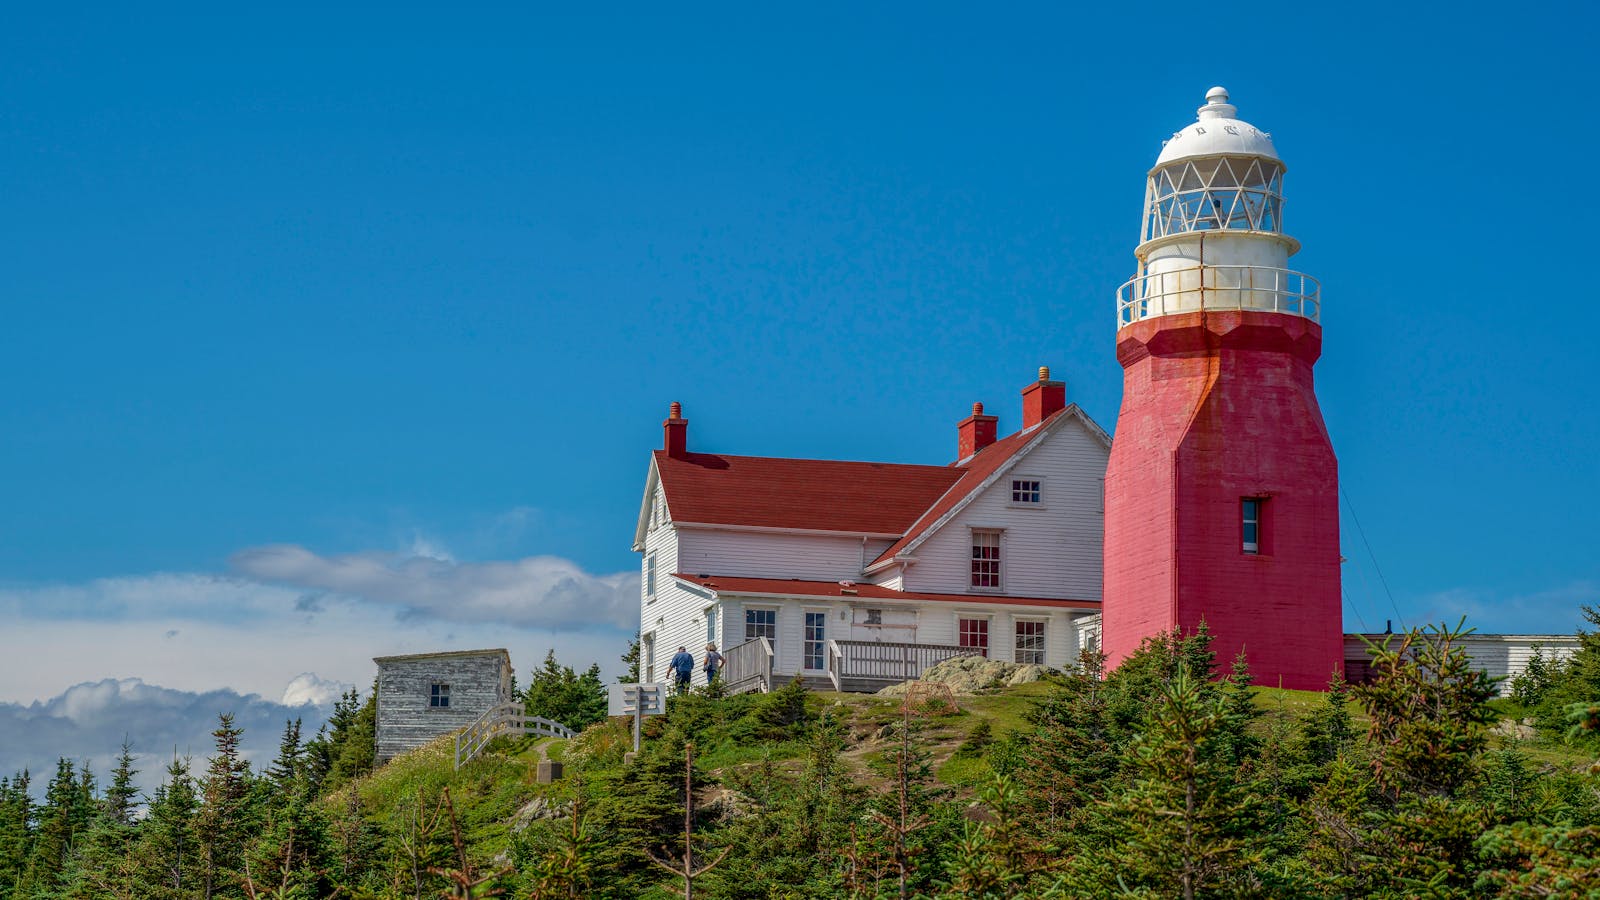 Long Point Lighthouse and Museum, Crow Head, North Twillingate Island, Newfoundland